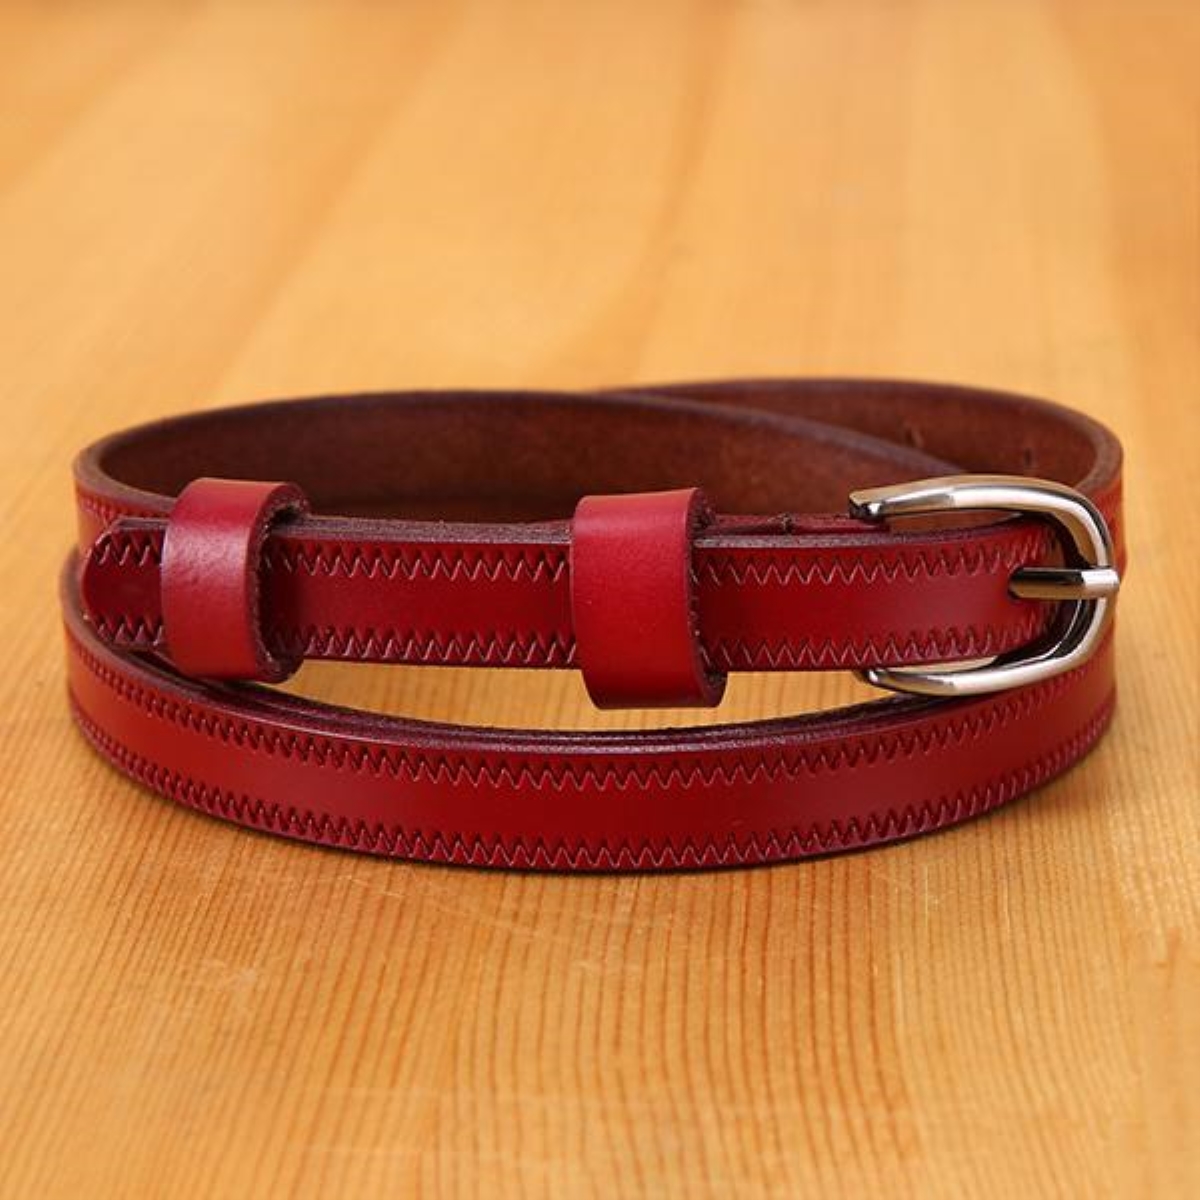 Women Casual Retro Solid Color Pure Cowhide Thin Belt 25068284c